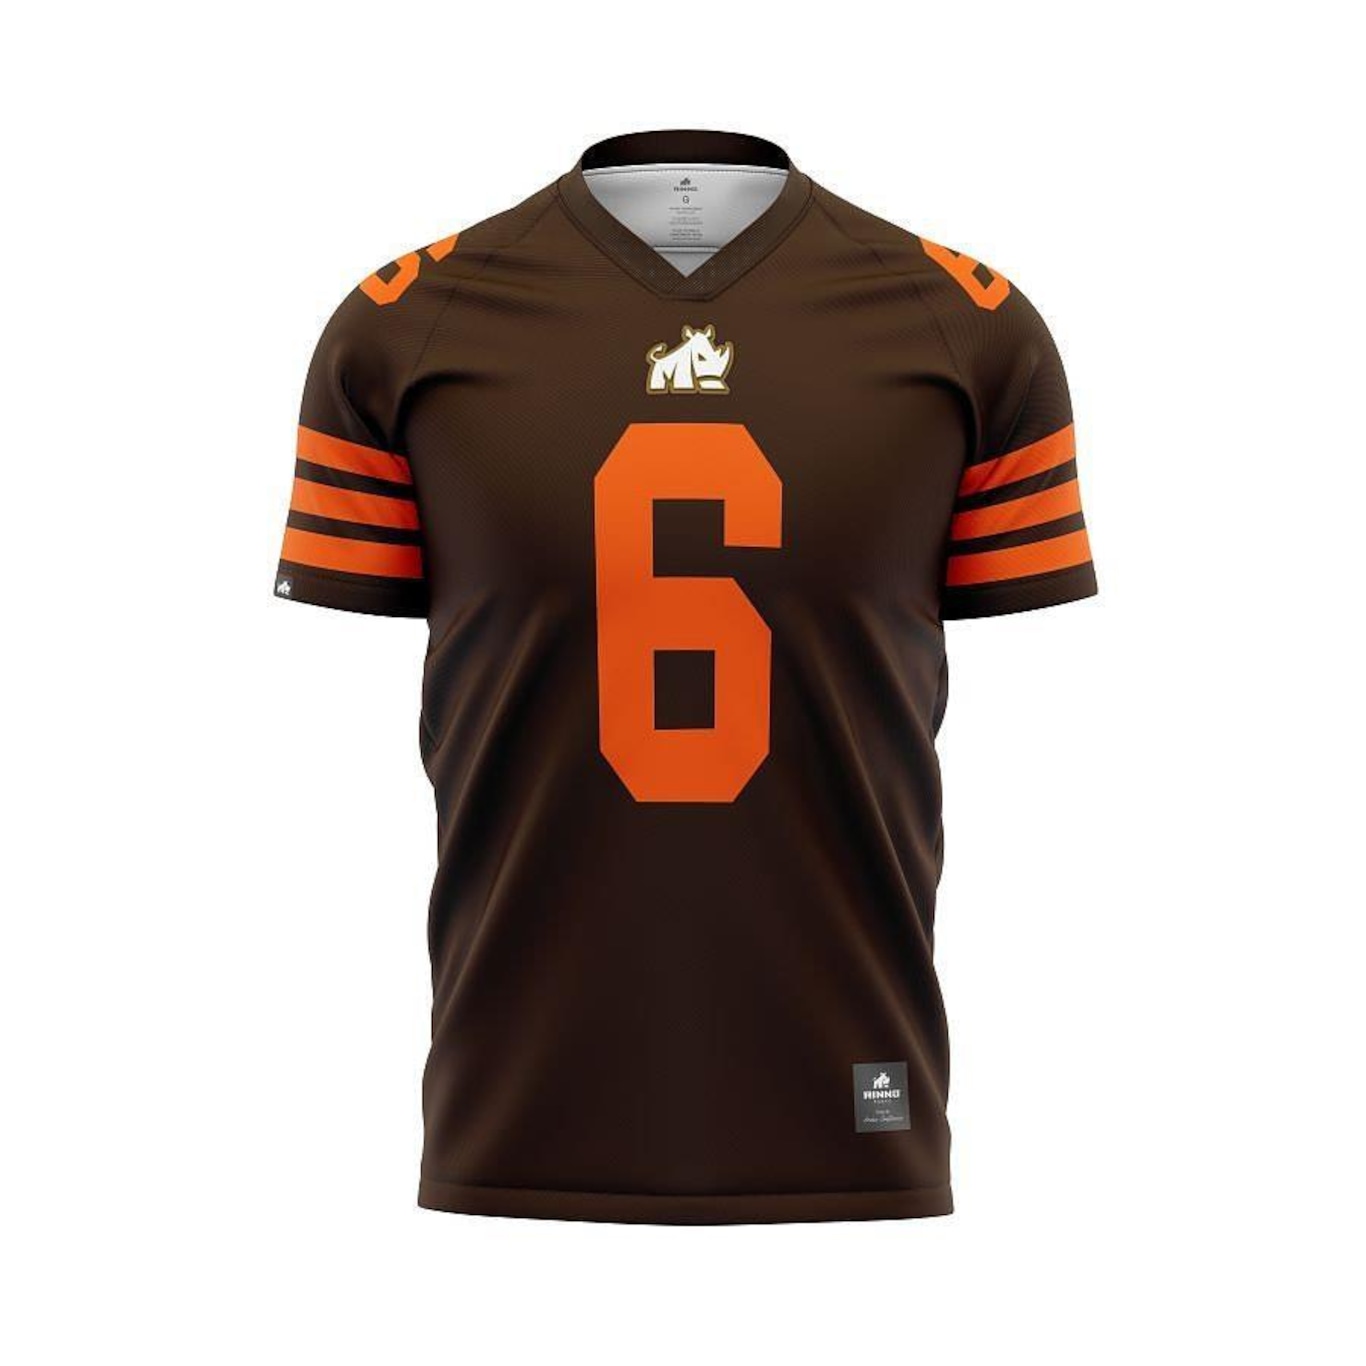 Camiseta Cleveland Browns Dry Retrô Rinno Force - Masculina - Foto 1